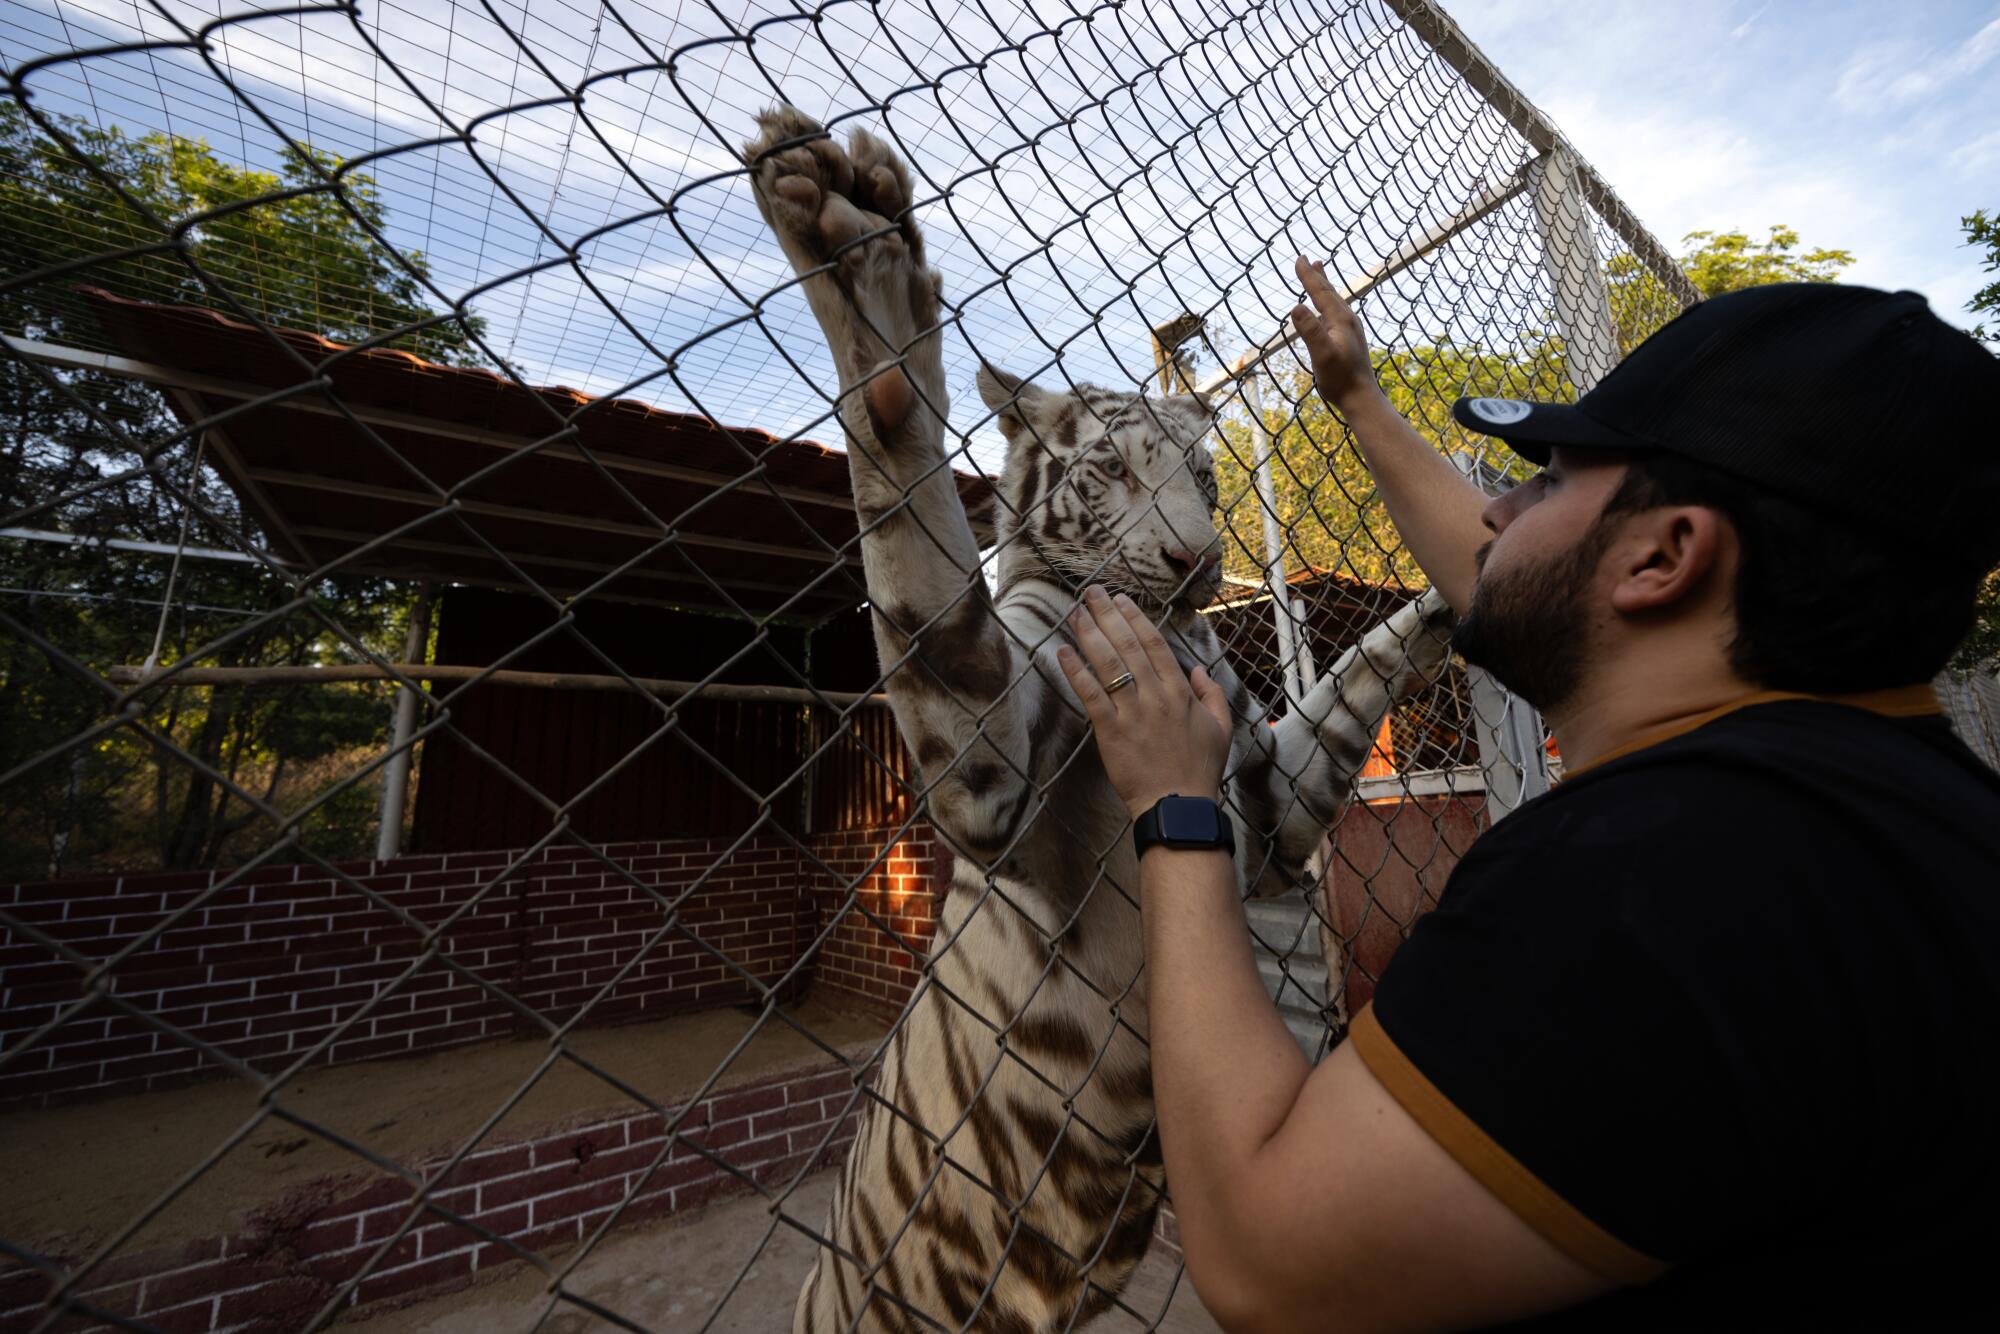 A tiger stands against a chain link fence as a man gets close on the other side.